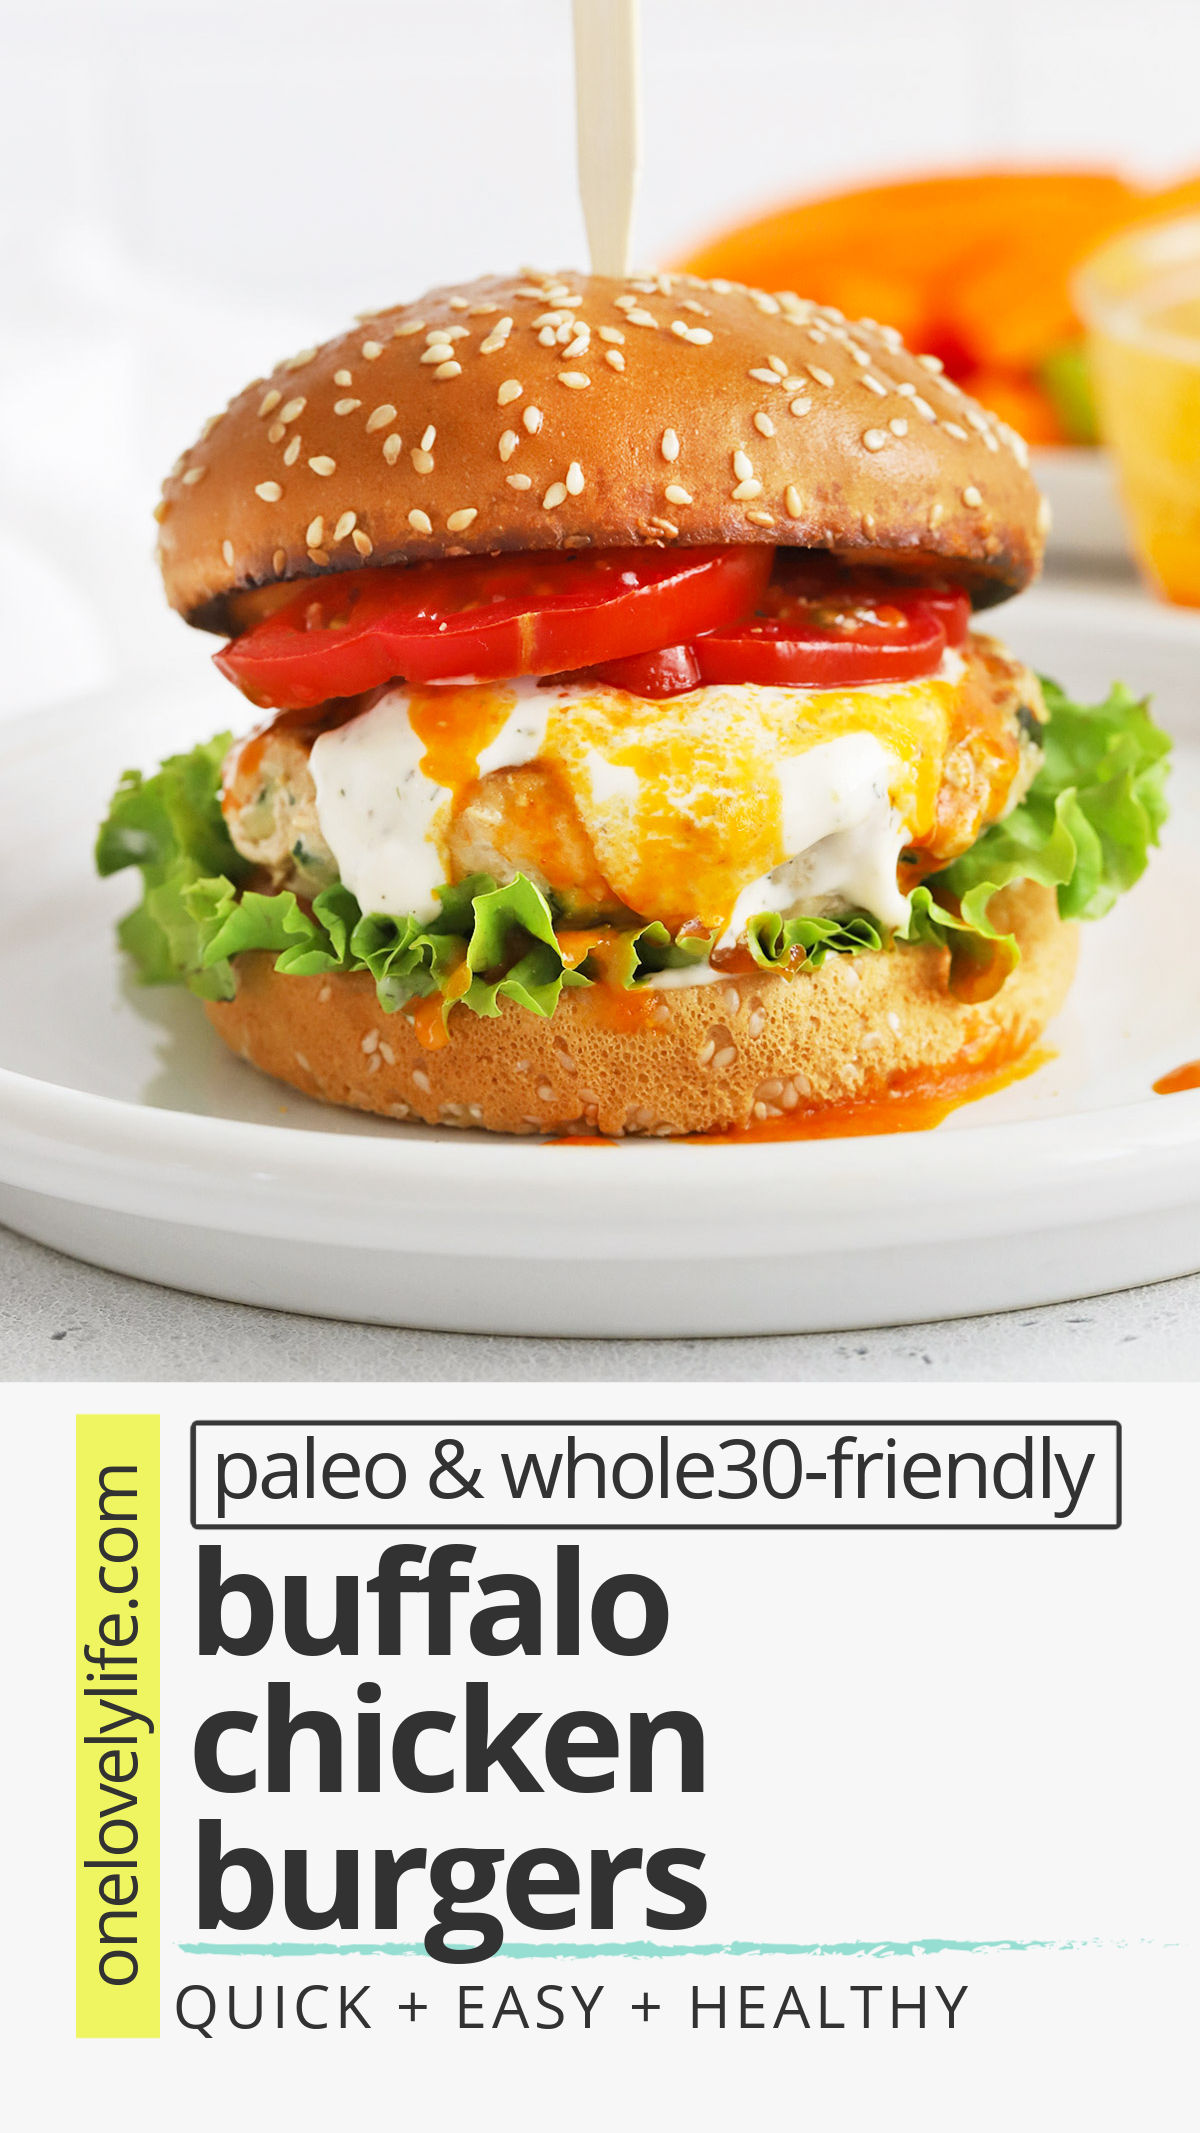 Healthy Buffalo Chicken Burgers - Lean chicken burgers with grated zucchini and a buffalo kick make a fresh, easy dinner any time! (Paleo & Whole30-Friendly) // paleo buffalo chicken burgers // whole30 buffalo chicken burgers // chicken burger recipe // healthy grilling recipe #glutenfree #burger #chicken #whole30 #paleo